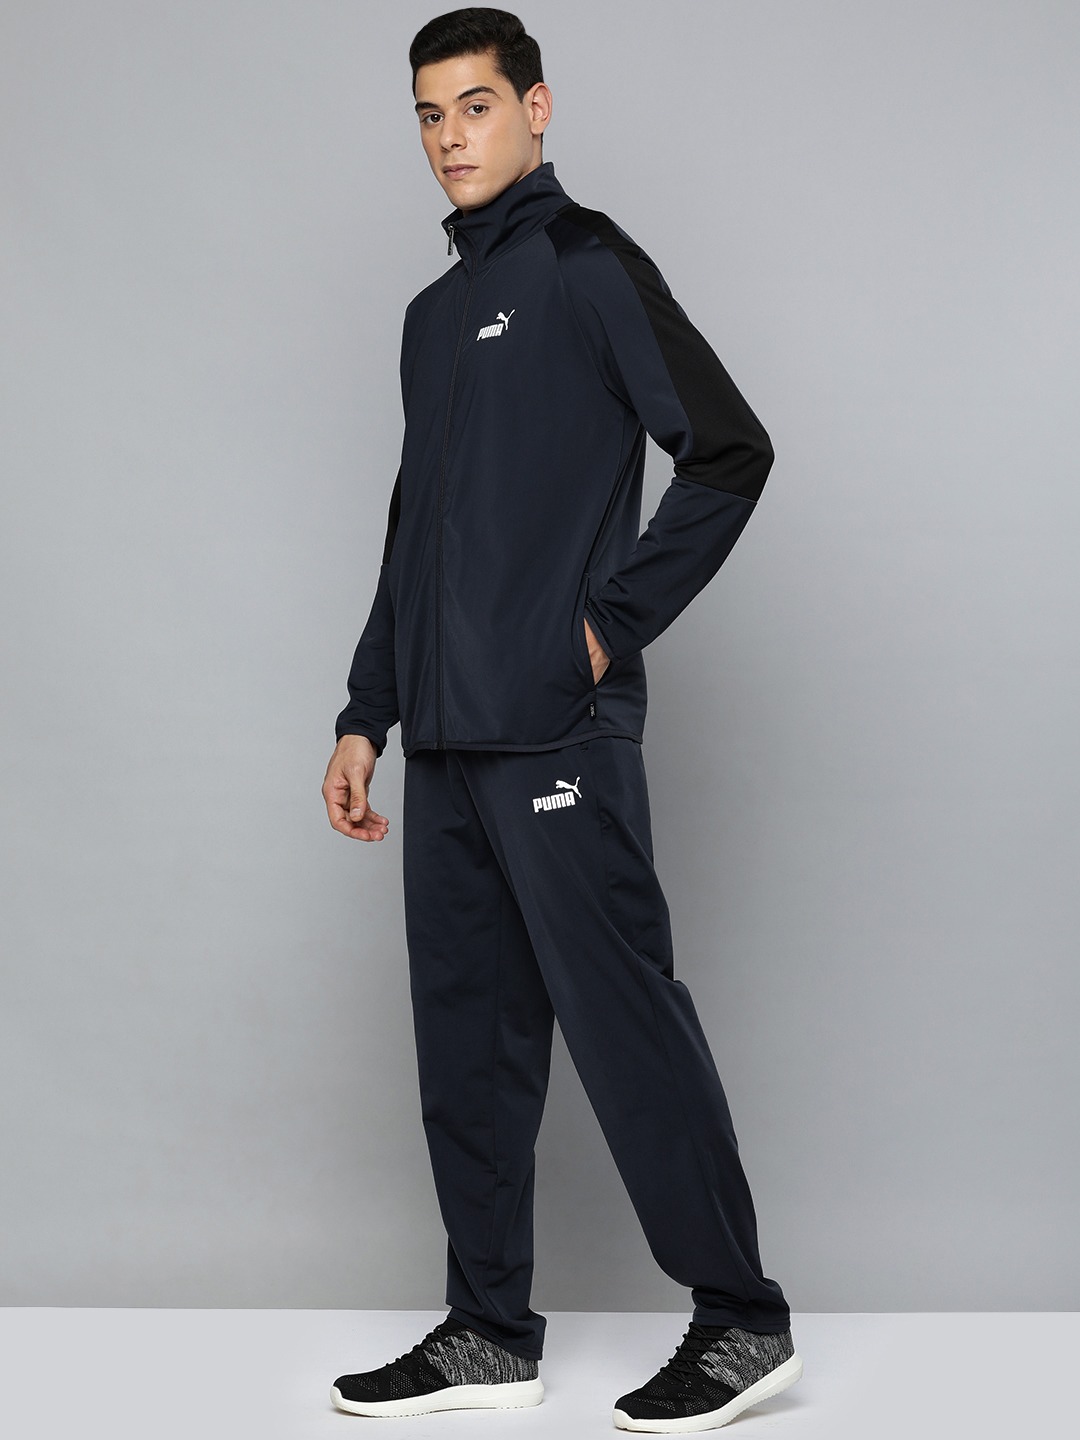 Clothing Tracksuits | Puma Men Navy Blue & Black Colourblocked High Neck Casual Tracksuite - TY12441